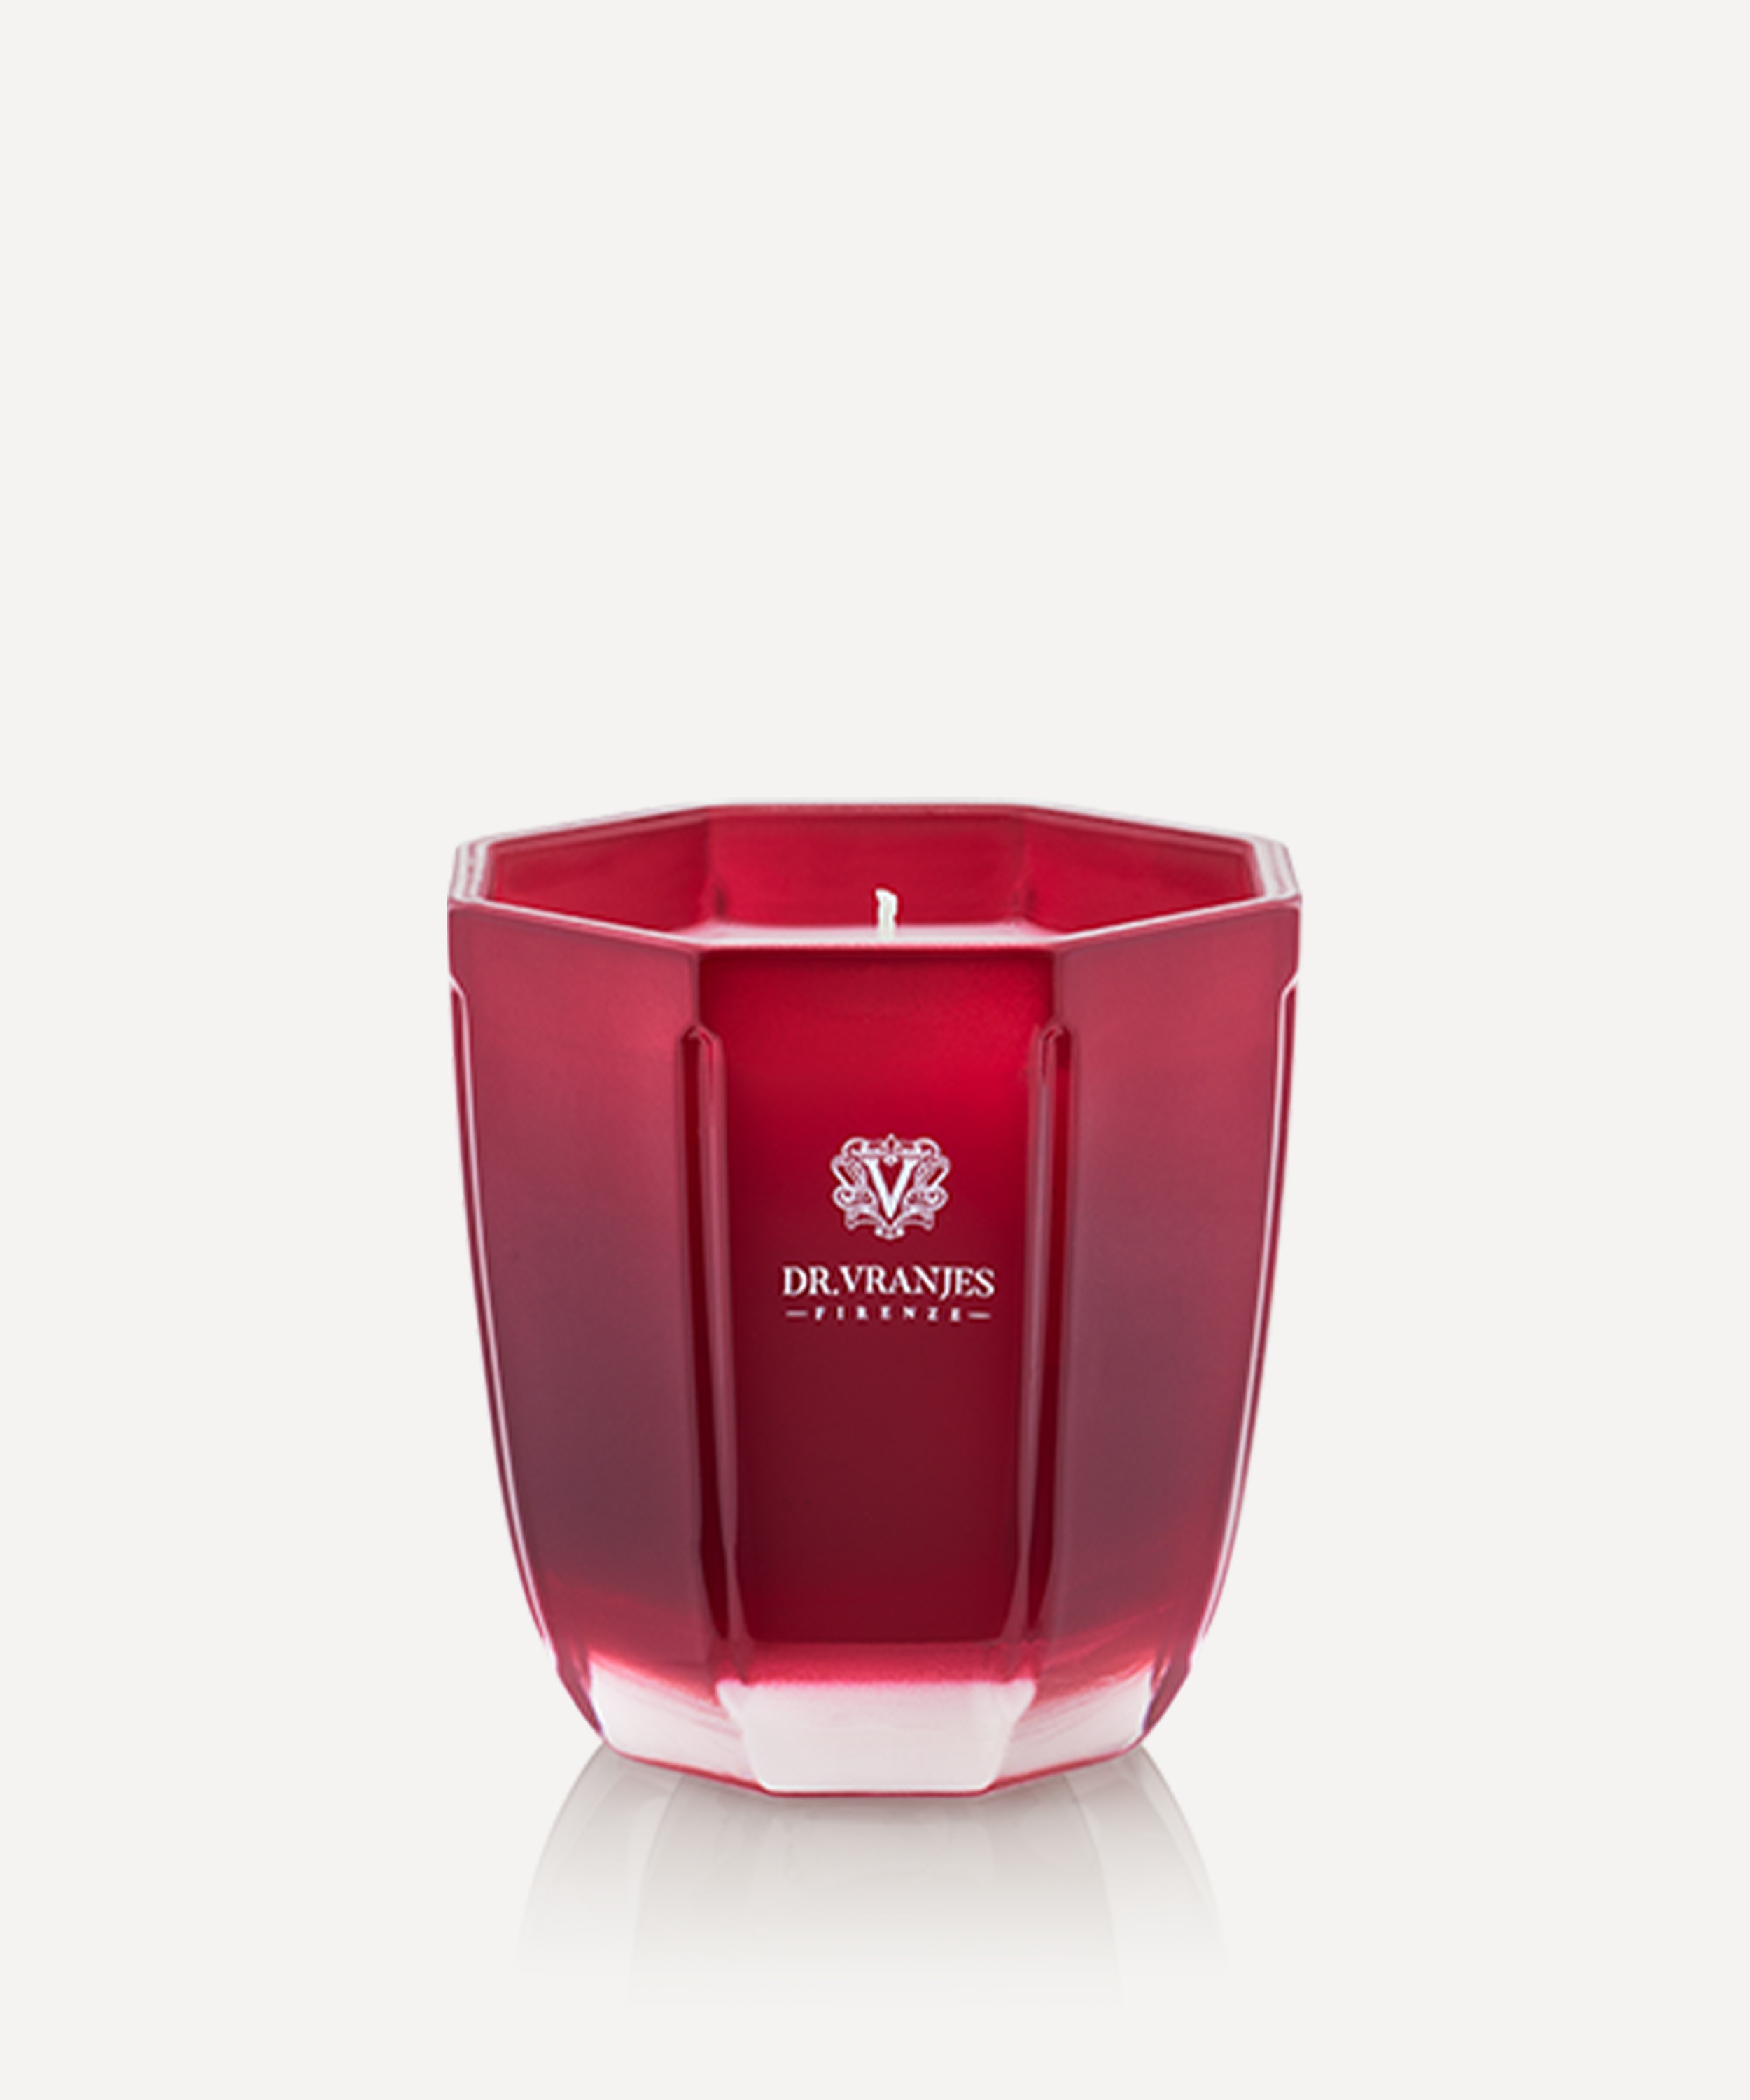 Dr Vranjes Firenze - Melograno Scented Candle 200g